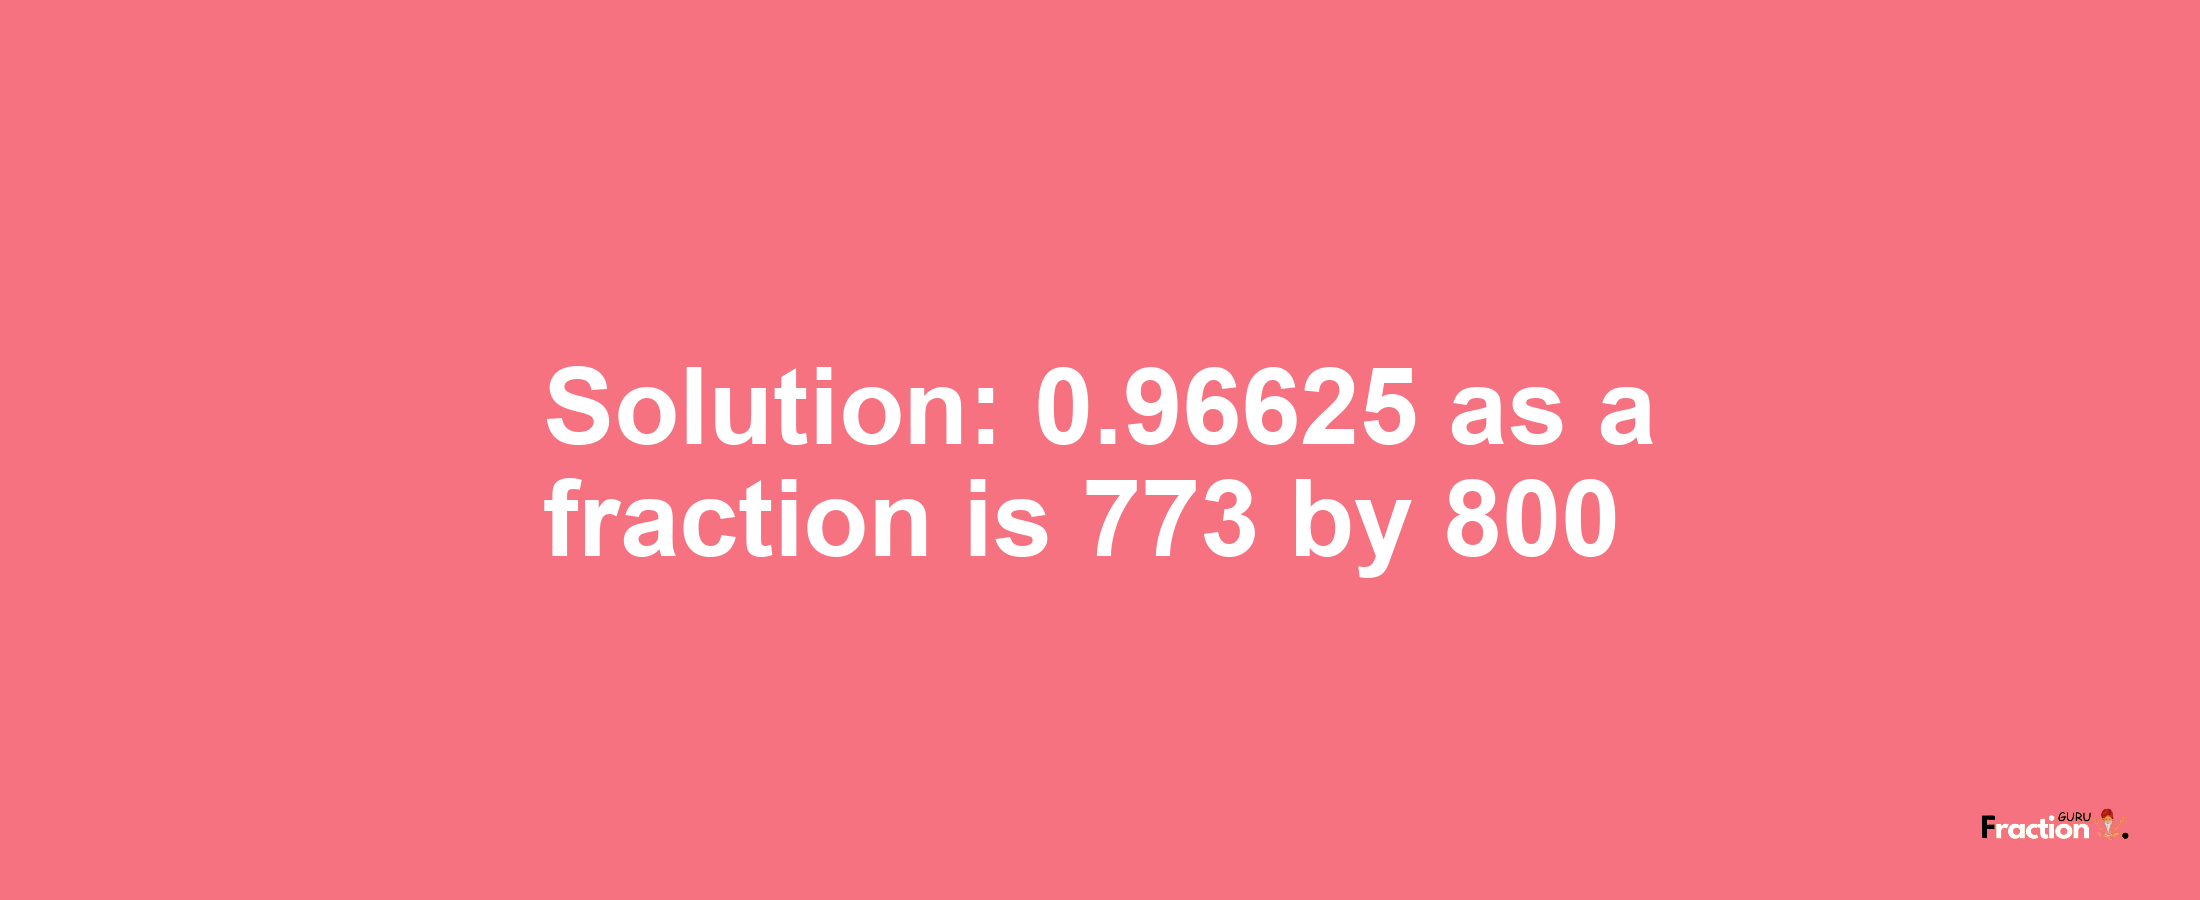 Solution:0.96625 as a fraction is 773/800